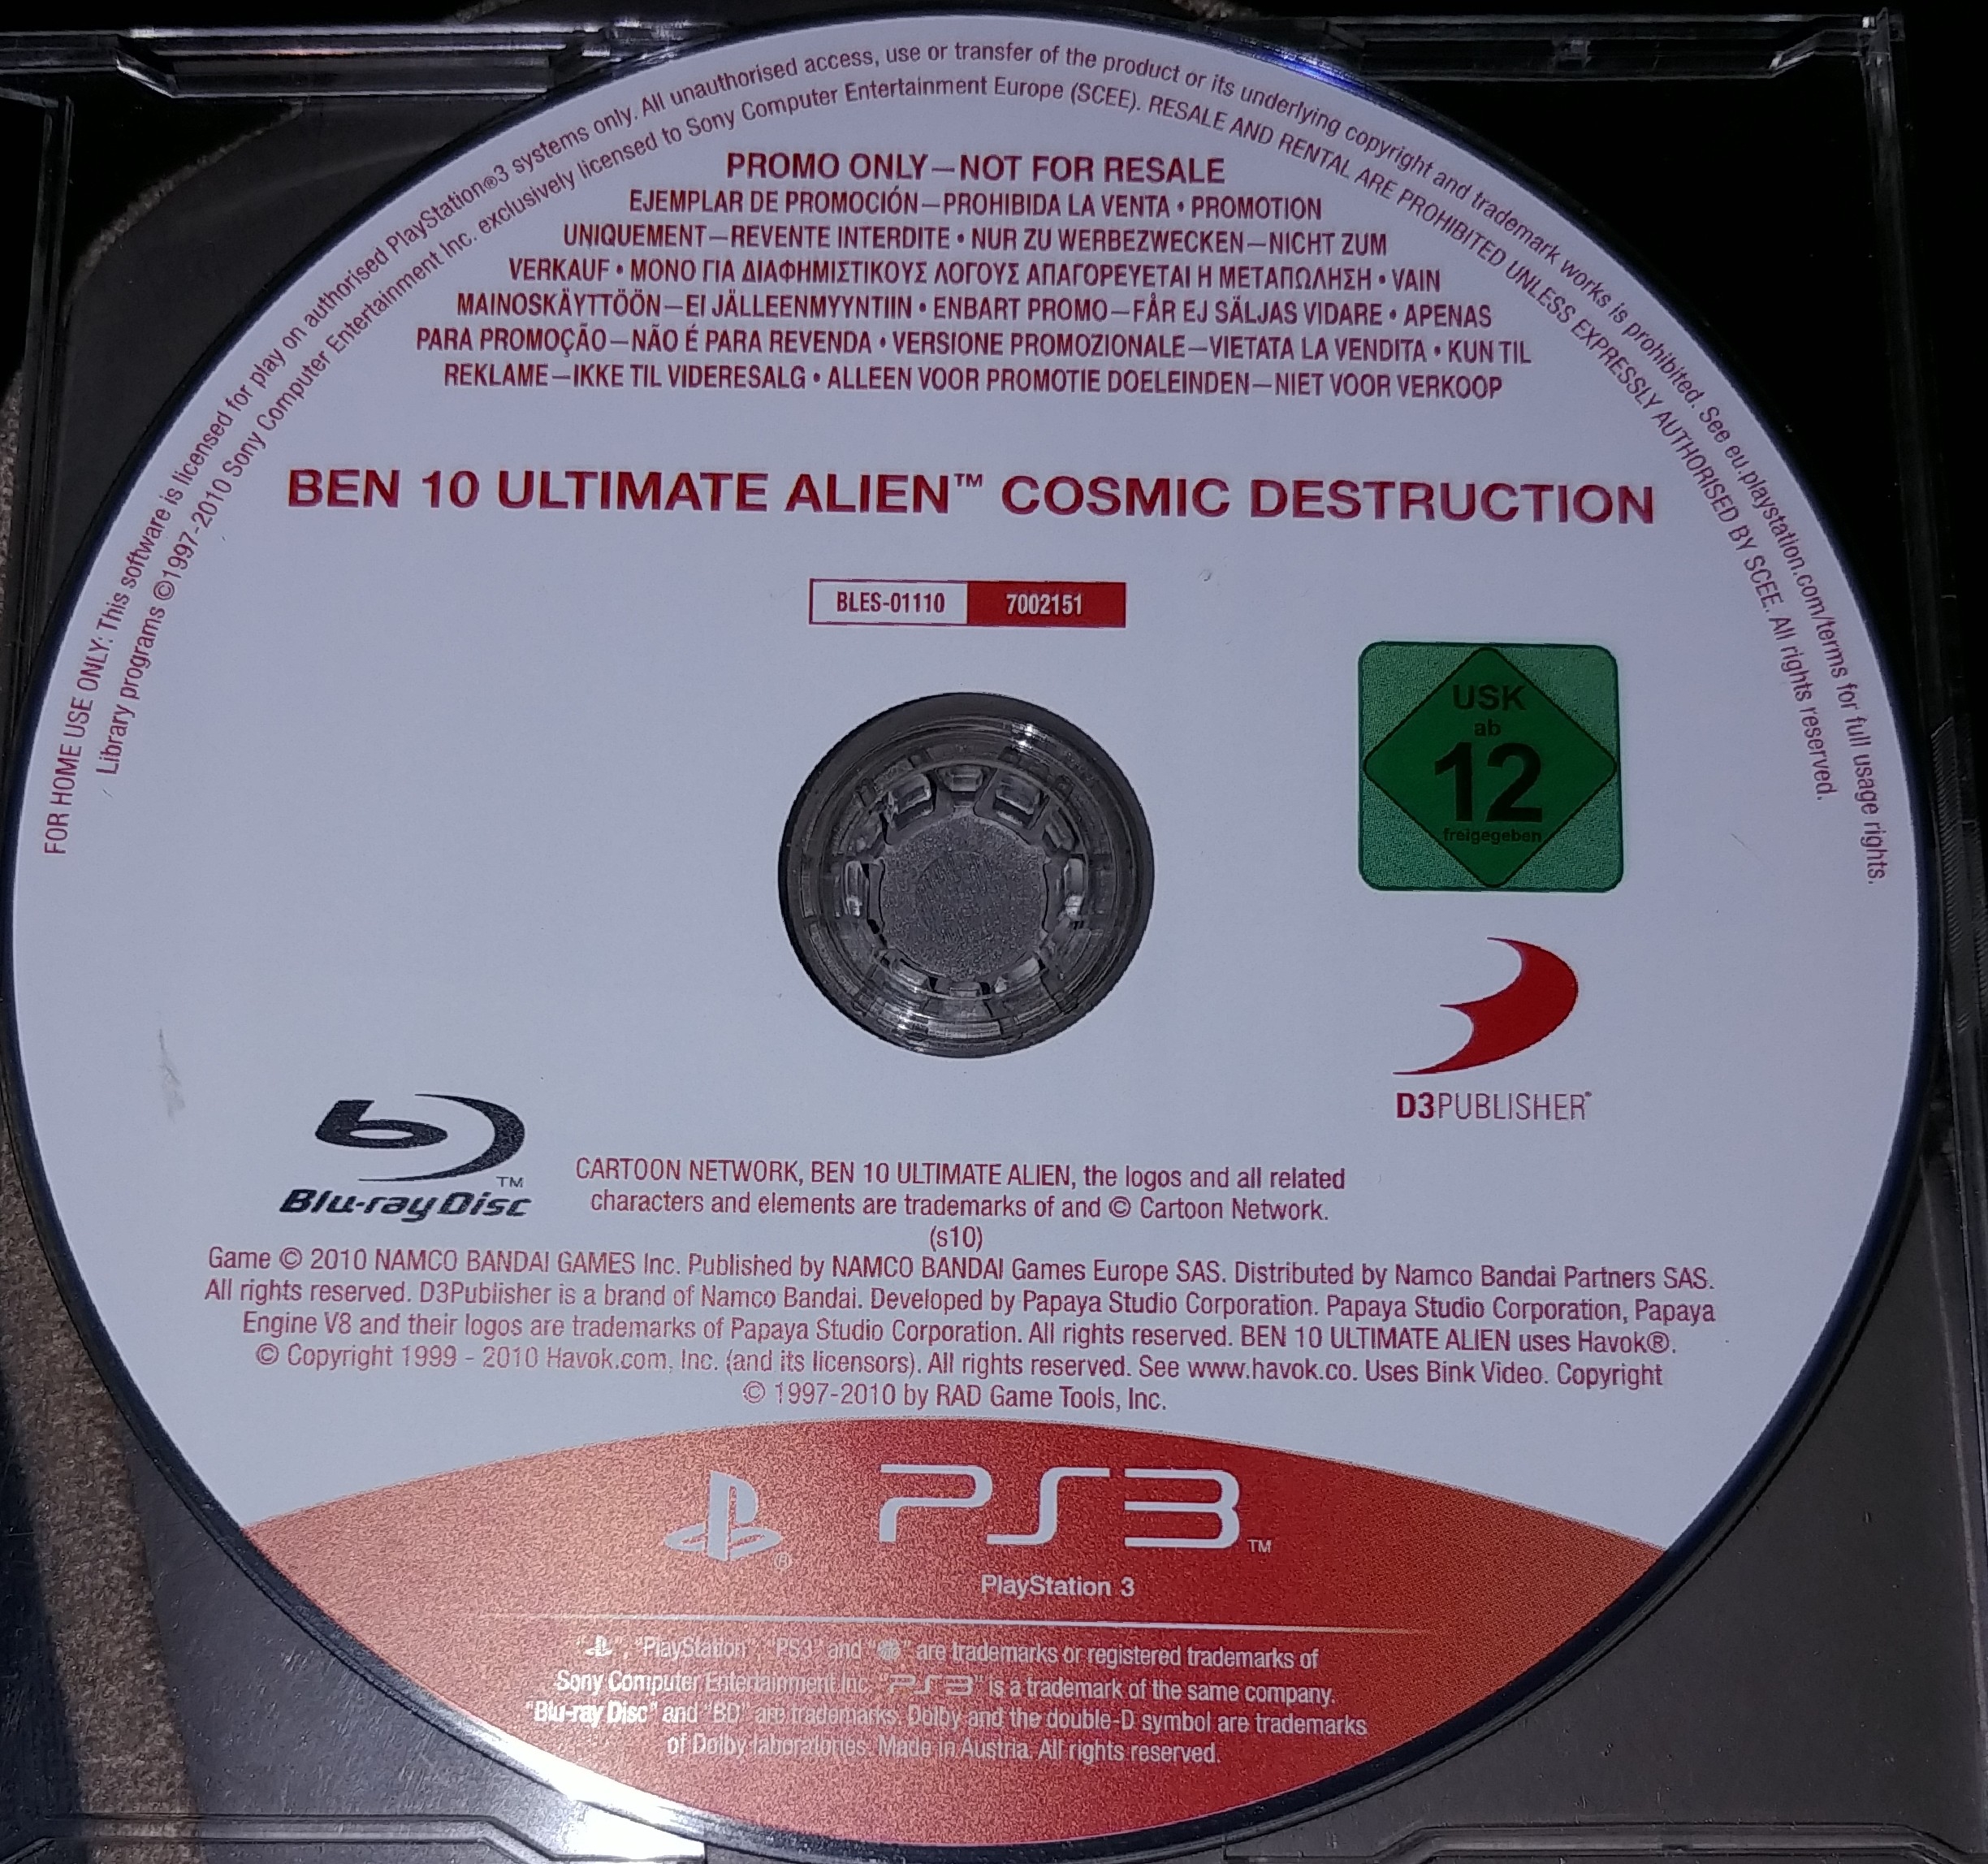 Ben 10 Cosmic Destruction (Sony Playstation 3 ps3) Complete GREAT